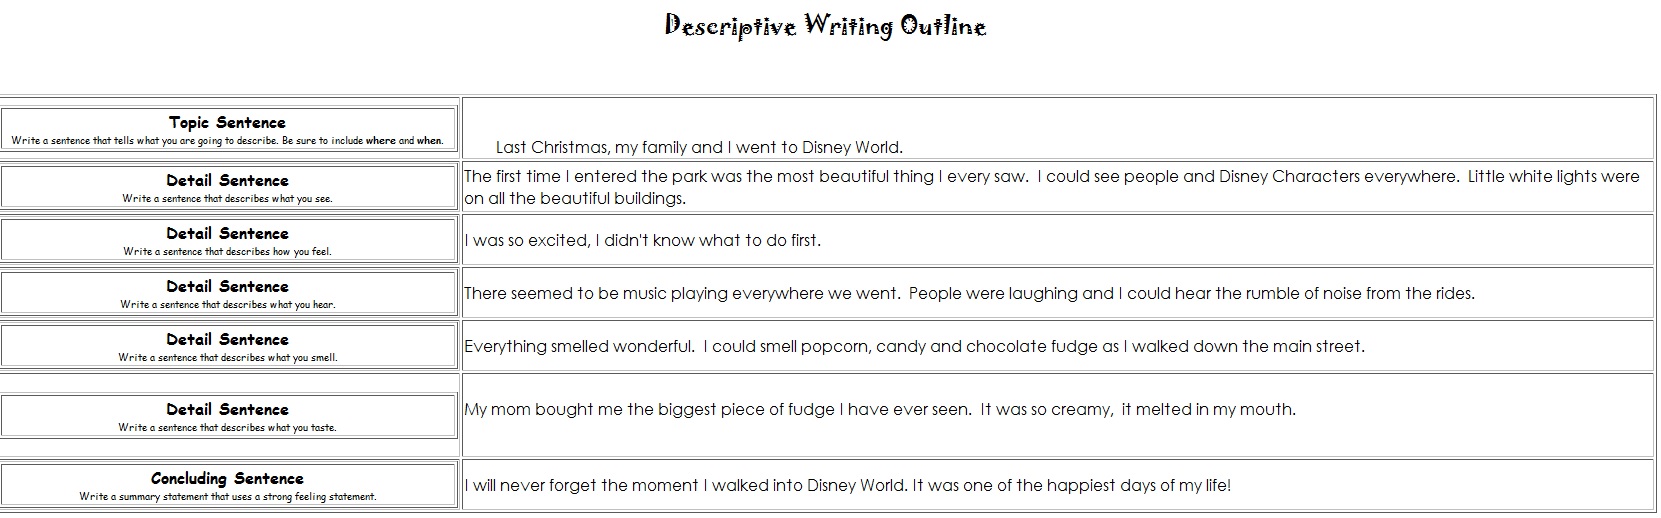 Outline sentence. Descriptive writing people примеры. Descriptive essay outline. A description of an event solutions example.